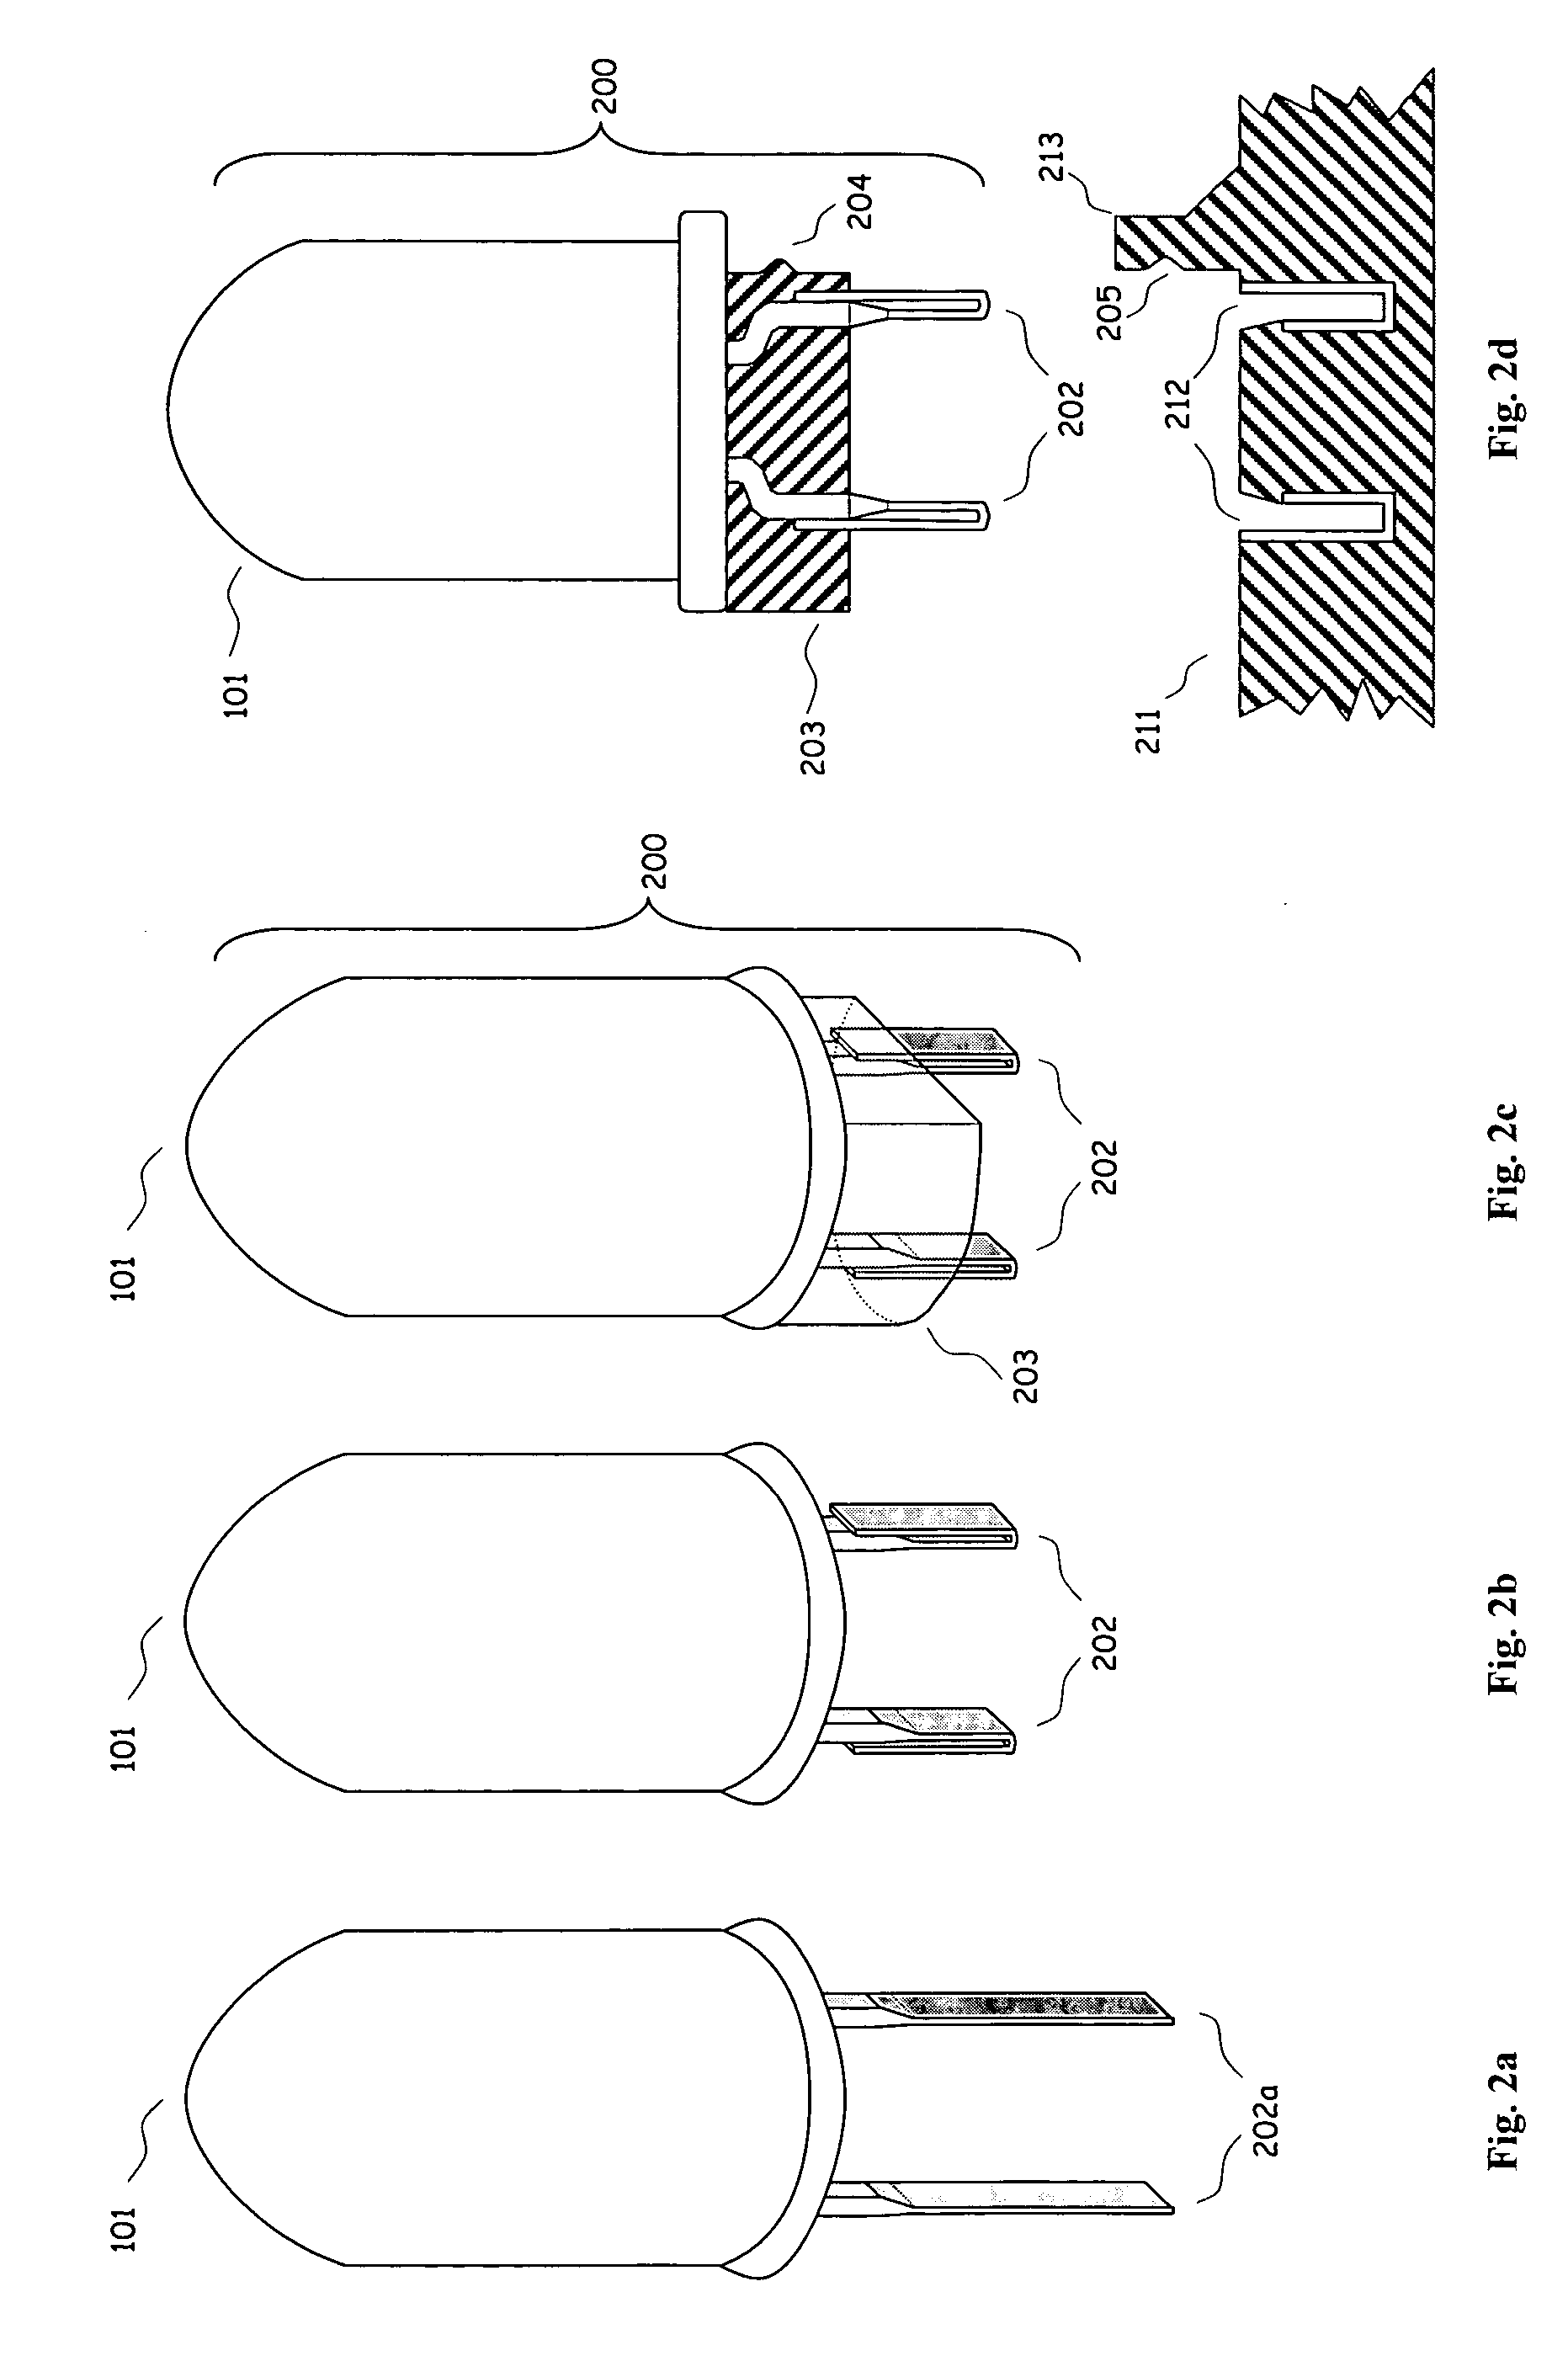 Method and system for attachment of light emmiting diodes to circuitry for use in lighting